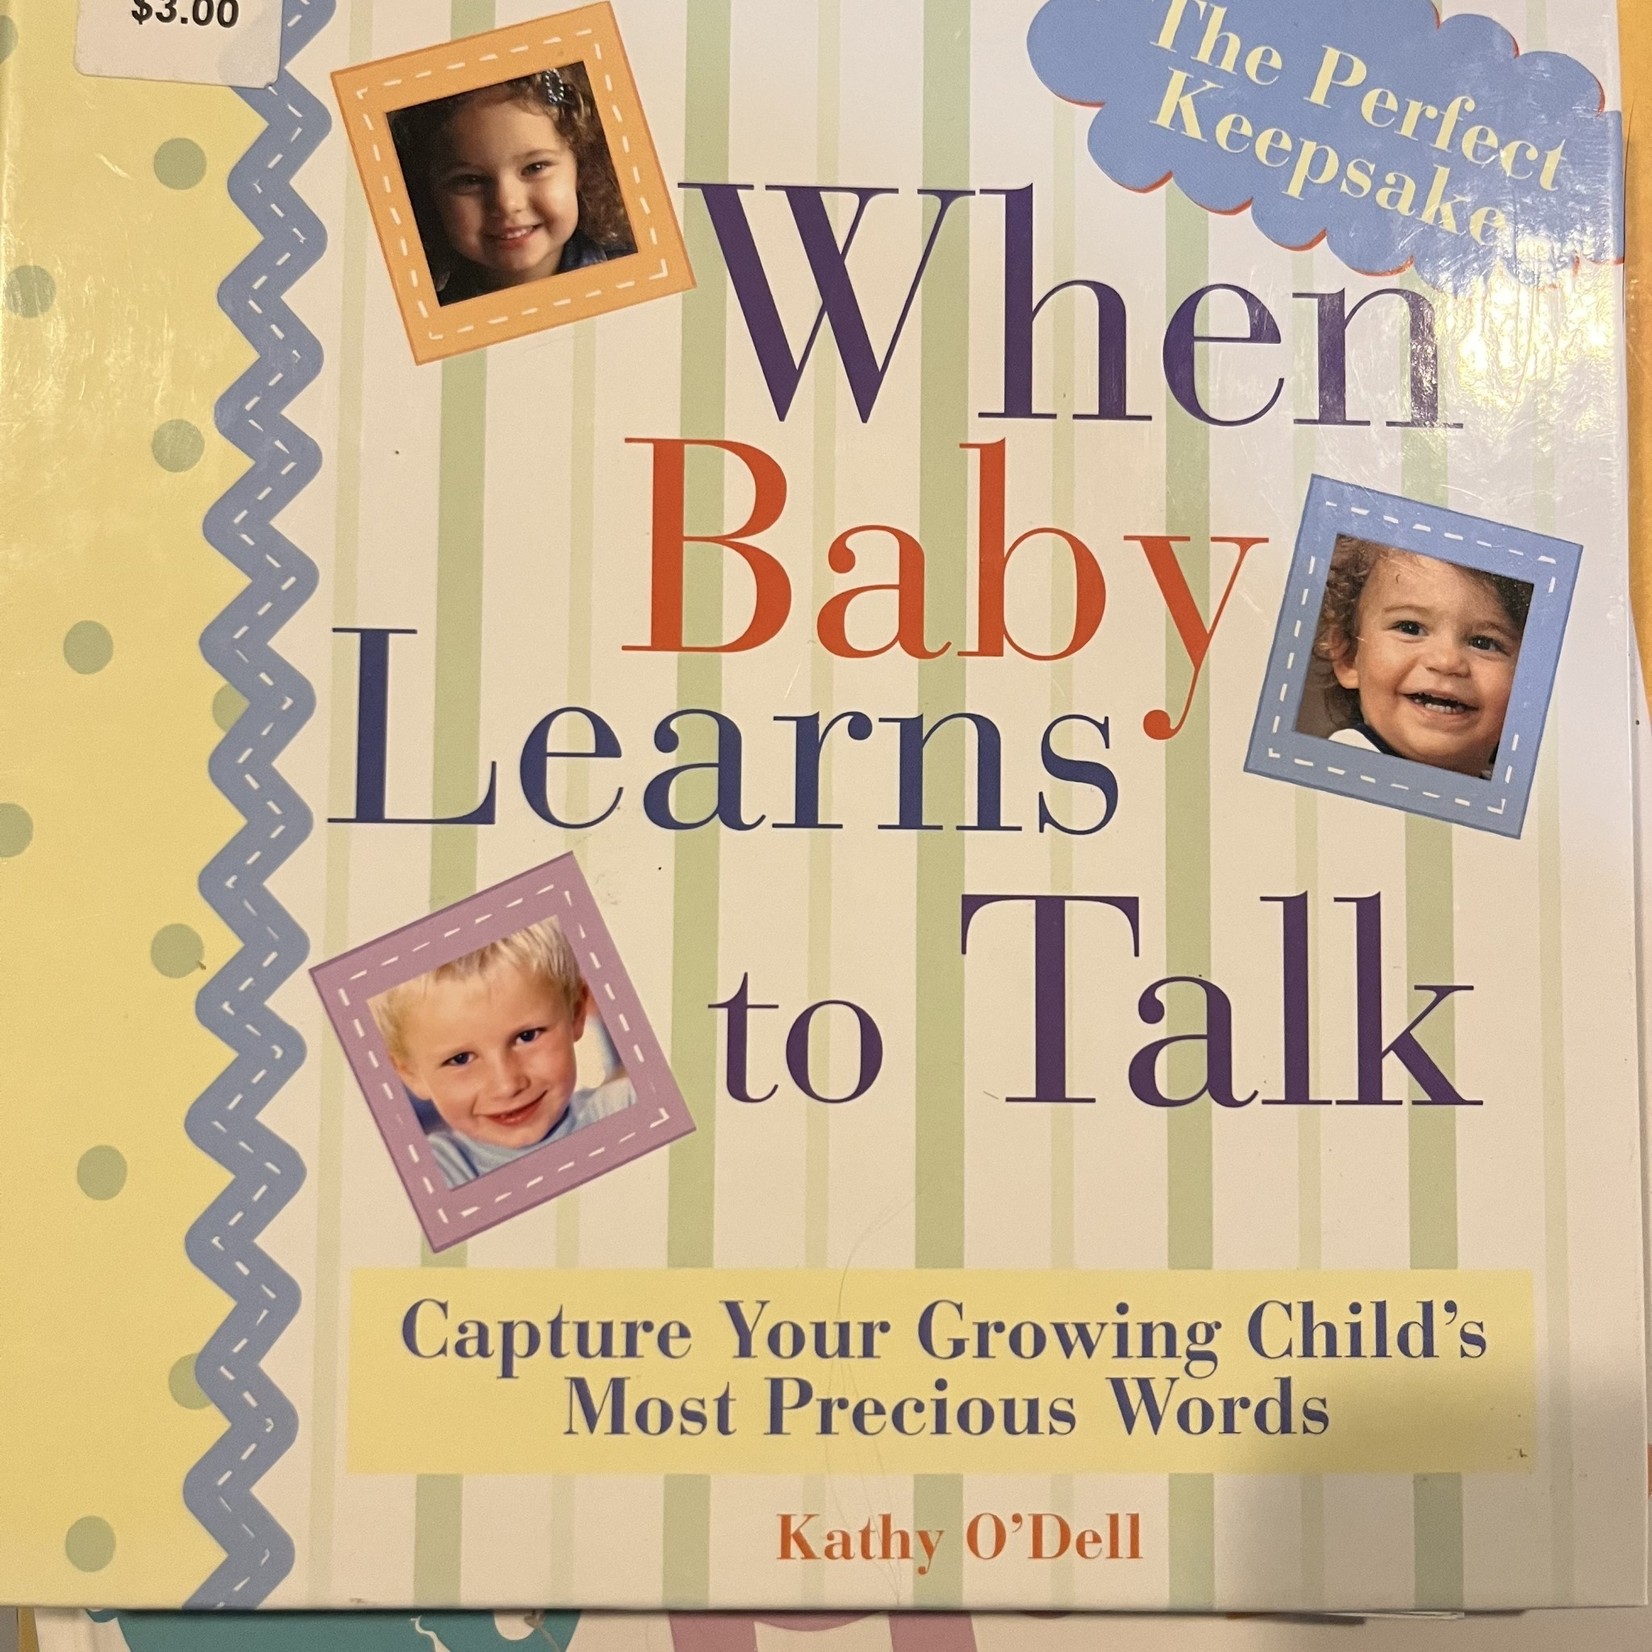 When Baby Learns to Talk (The Perfect Keepsake)